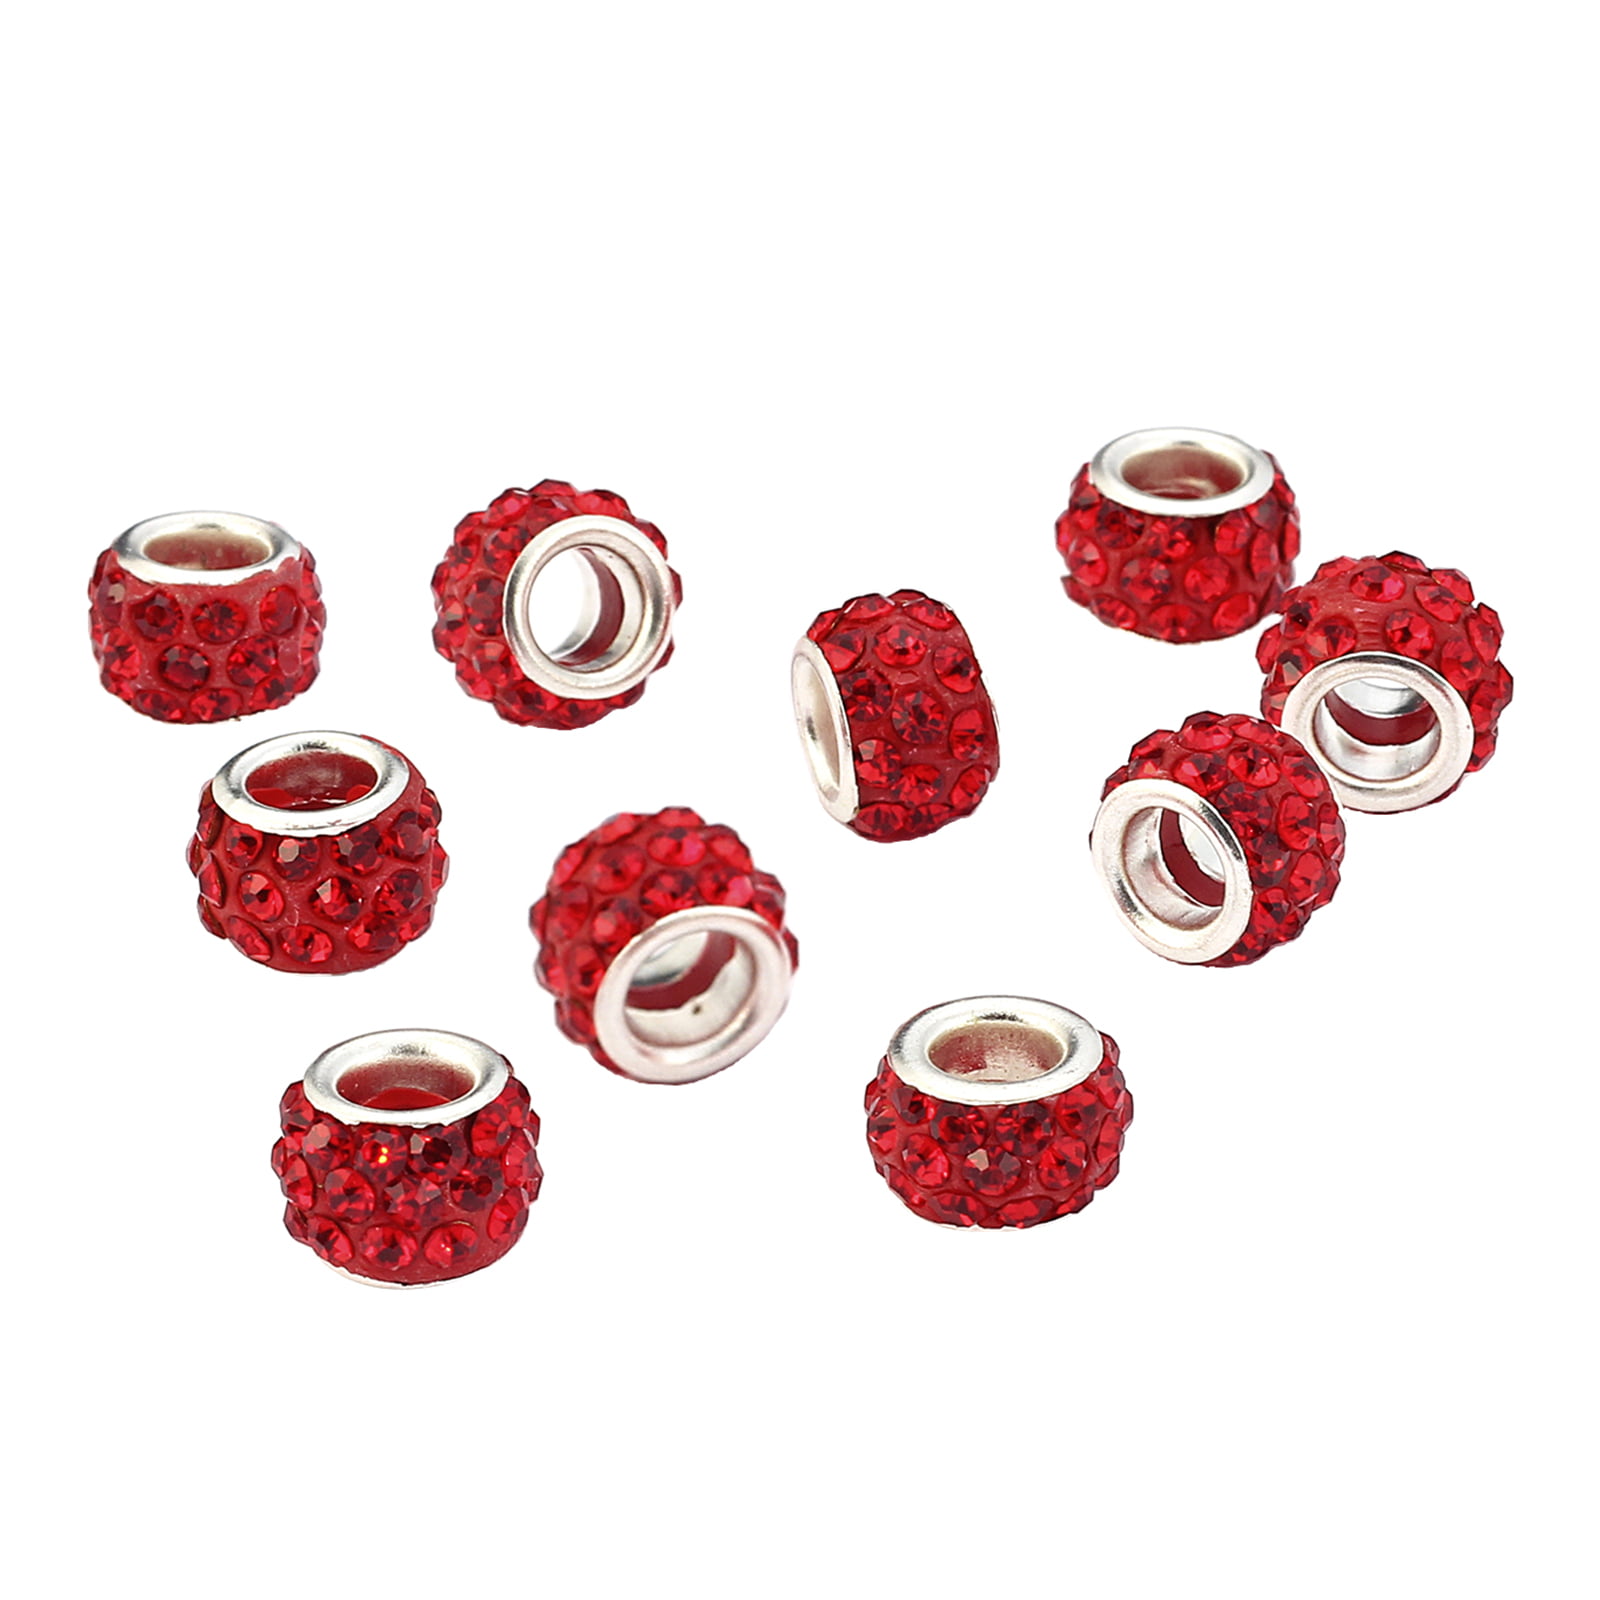 Large Big Hole Round Bone Loose Spacer Beads For Jewelry Making In Bulk 